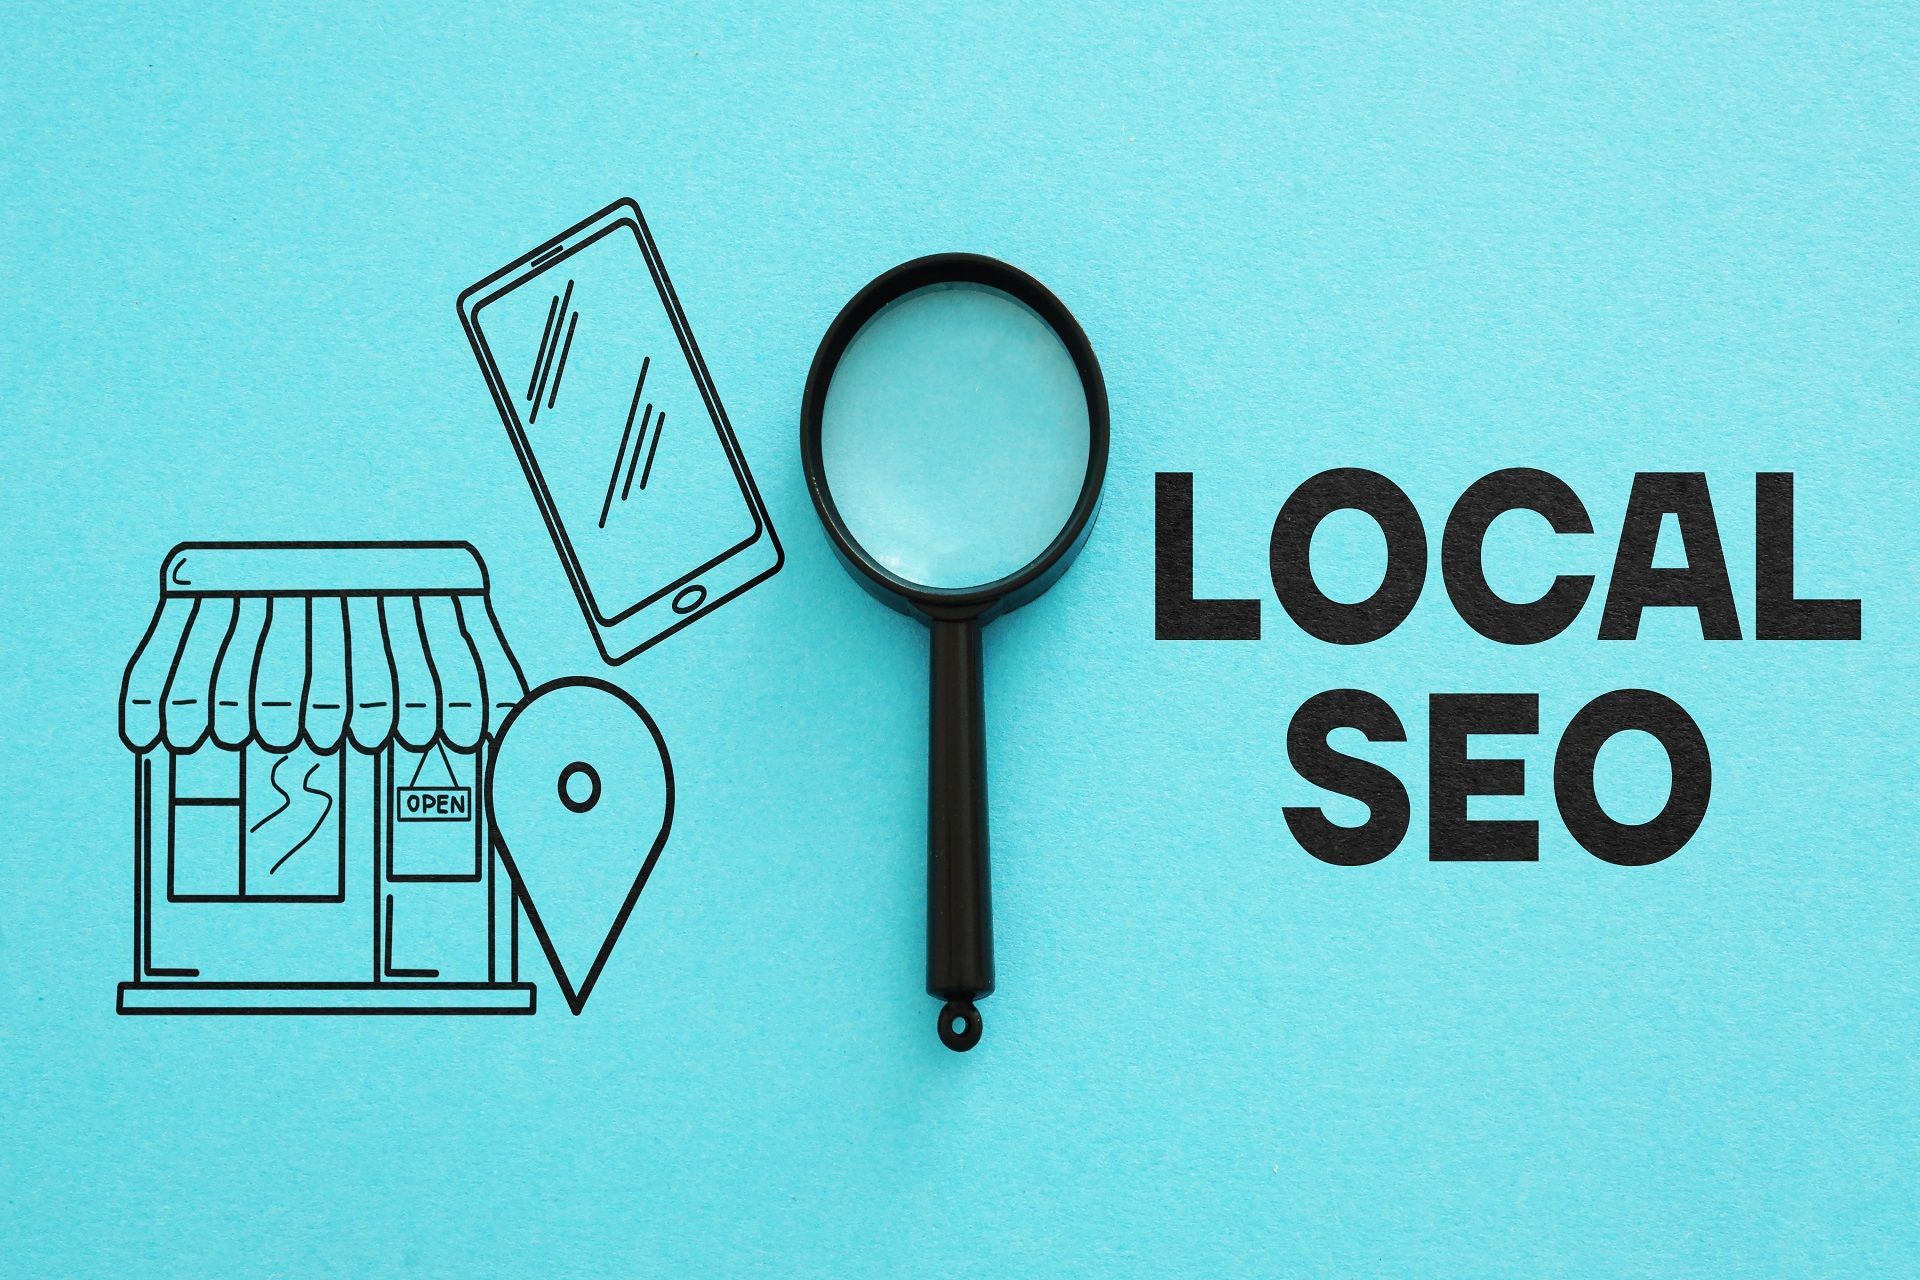 What Are the Benefits of Local SEO